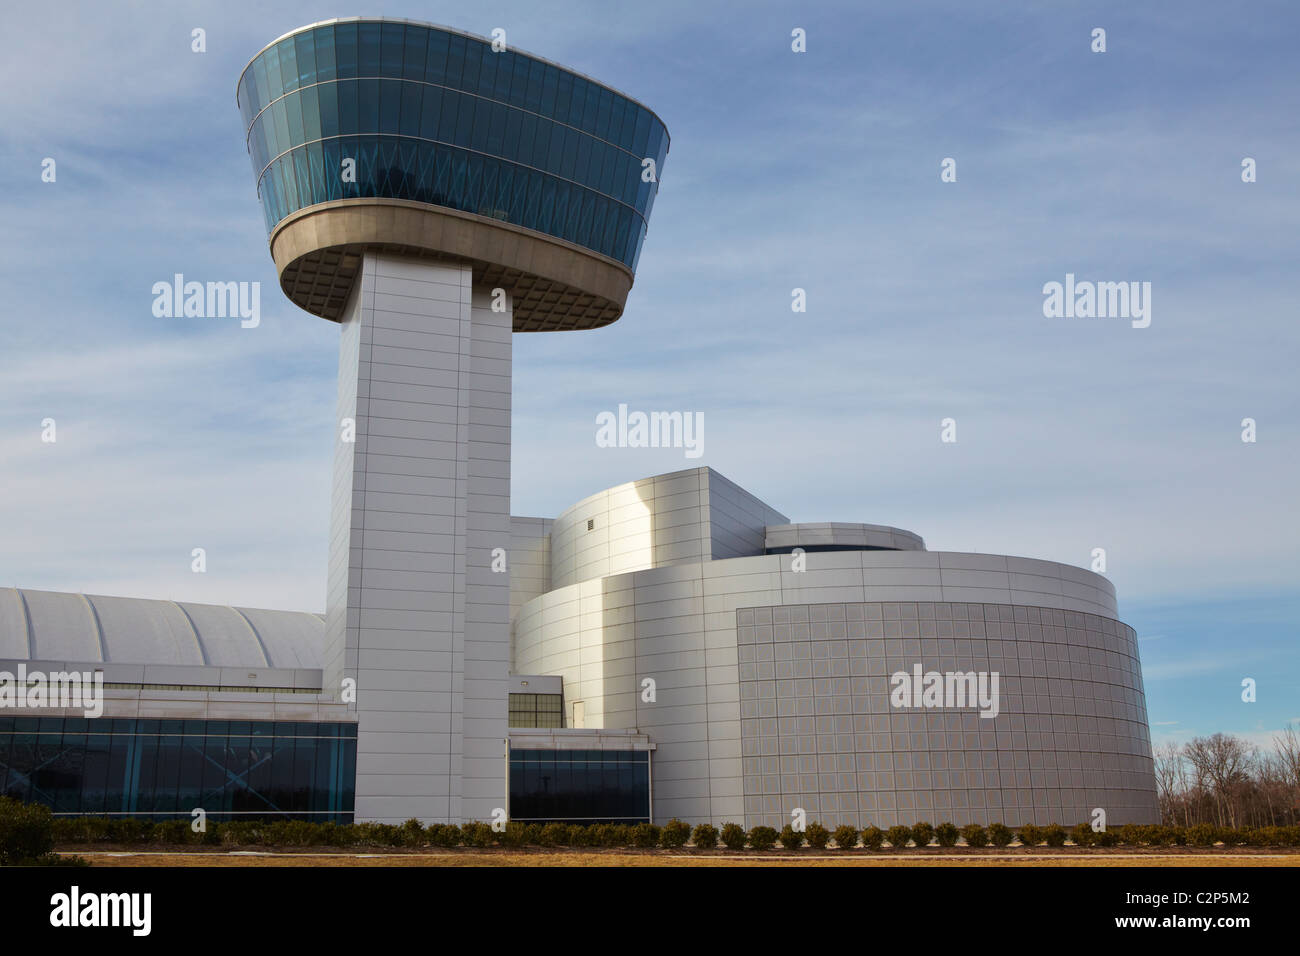 The Udvar-Hazy Center and Donald D. Engen Observation Tower, U.S. Smithsonian National Air and Space Museum, Chantilly, VA. Stock Photo